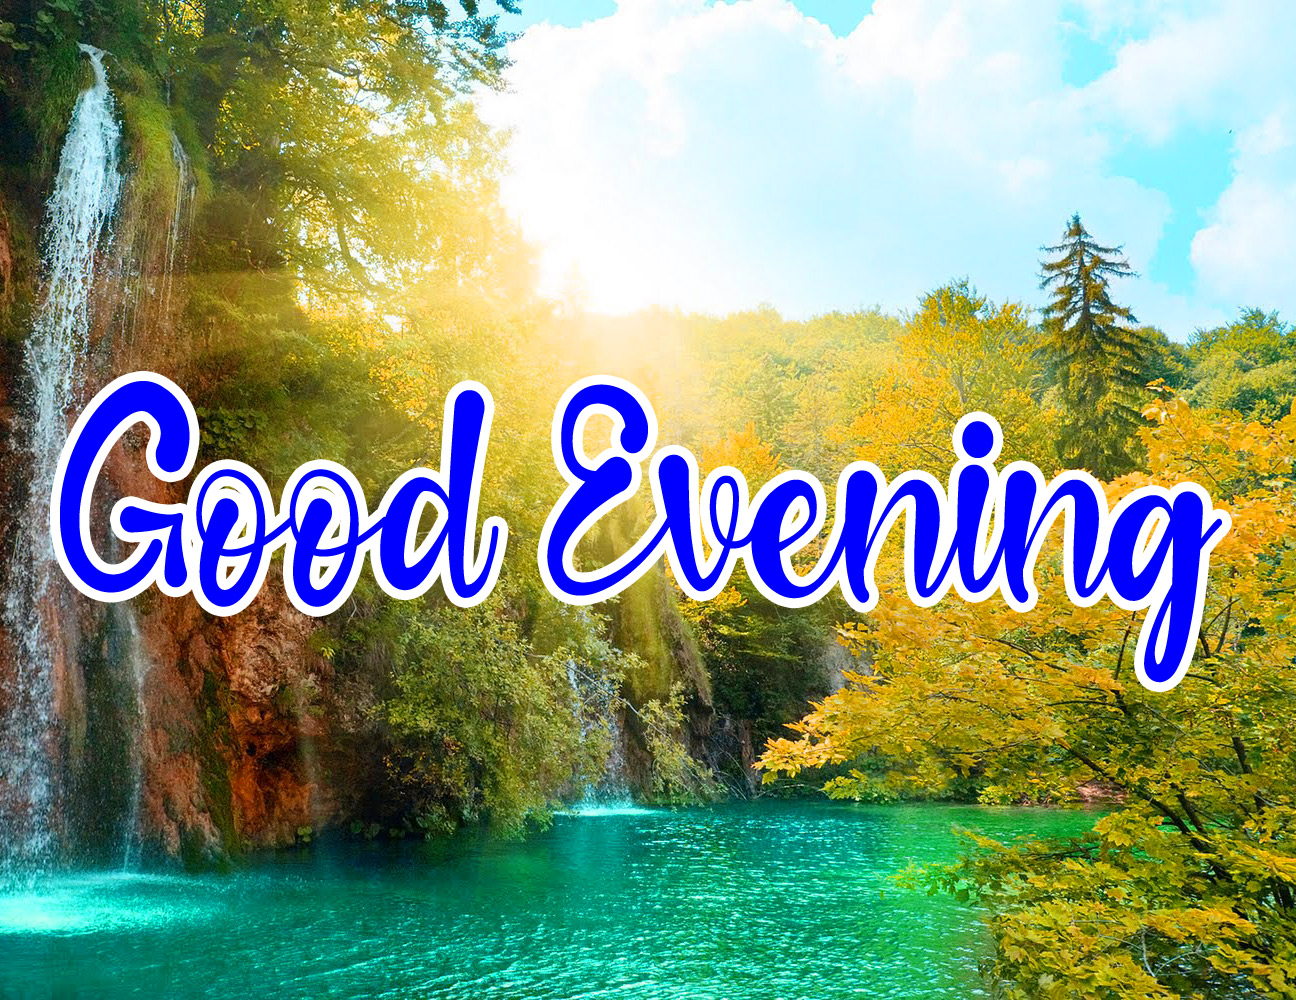 Free good evening images Wallpaper Download 